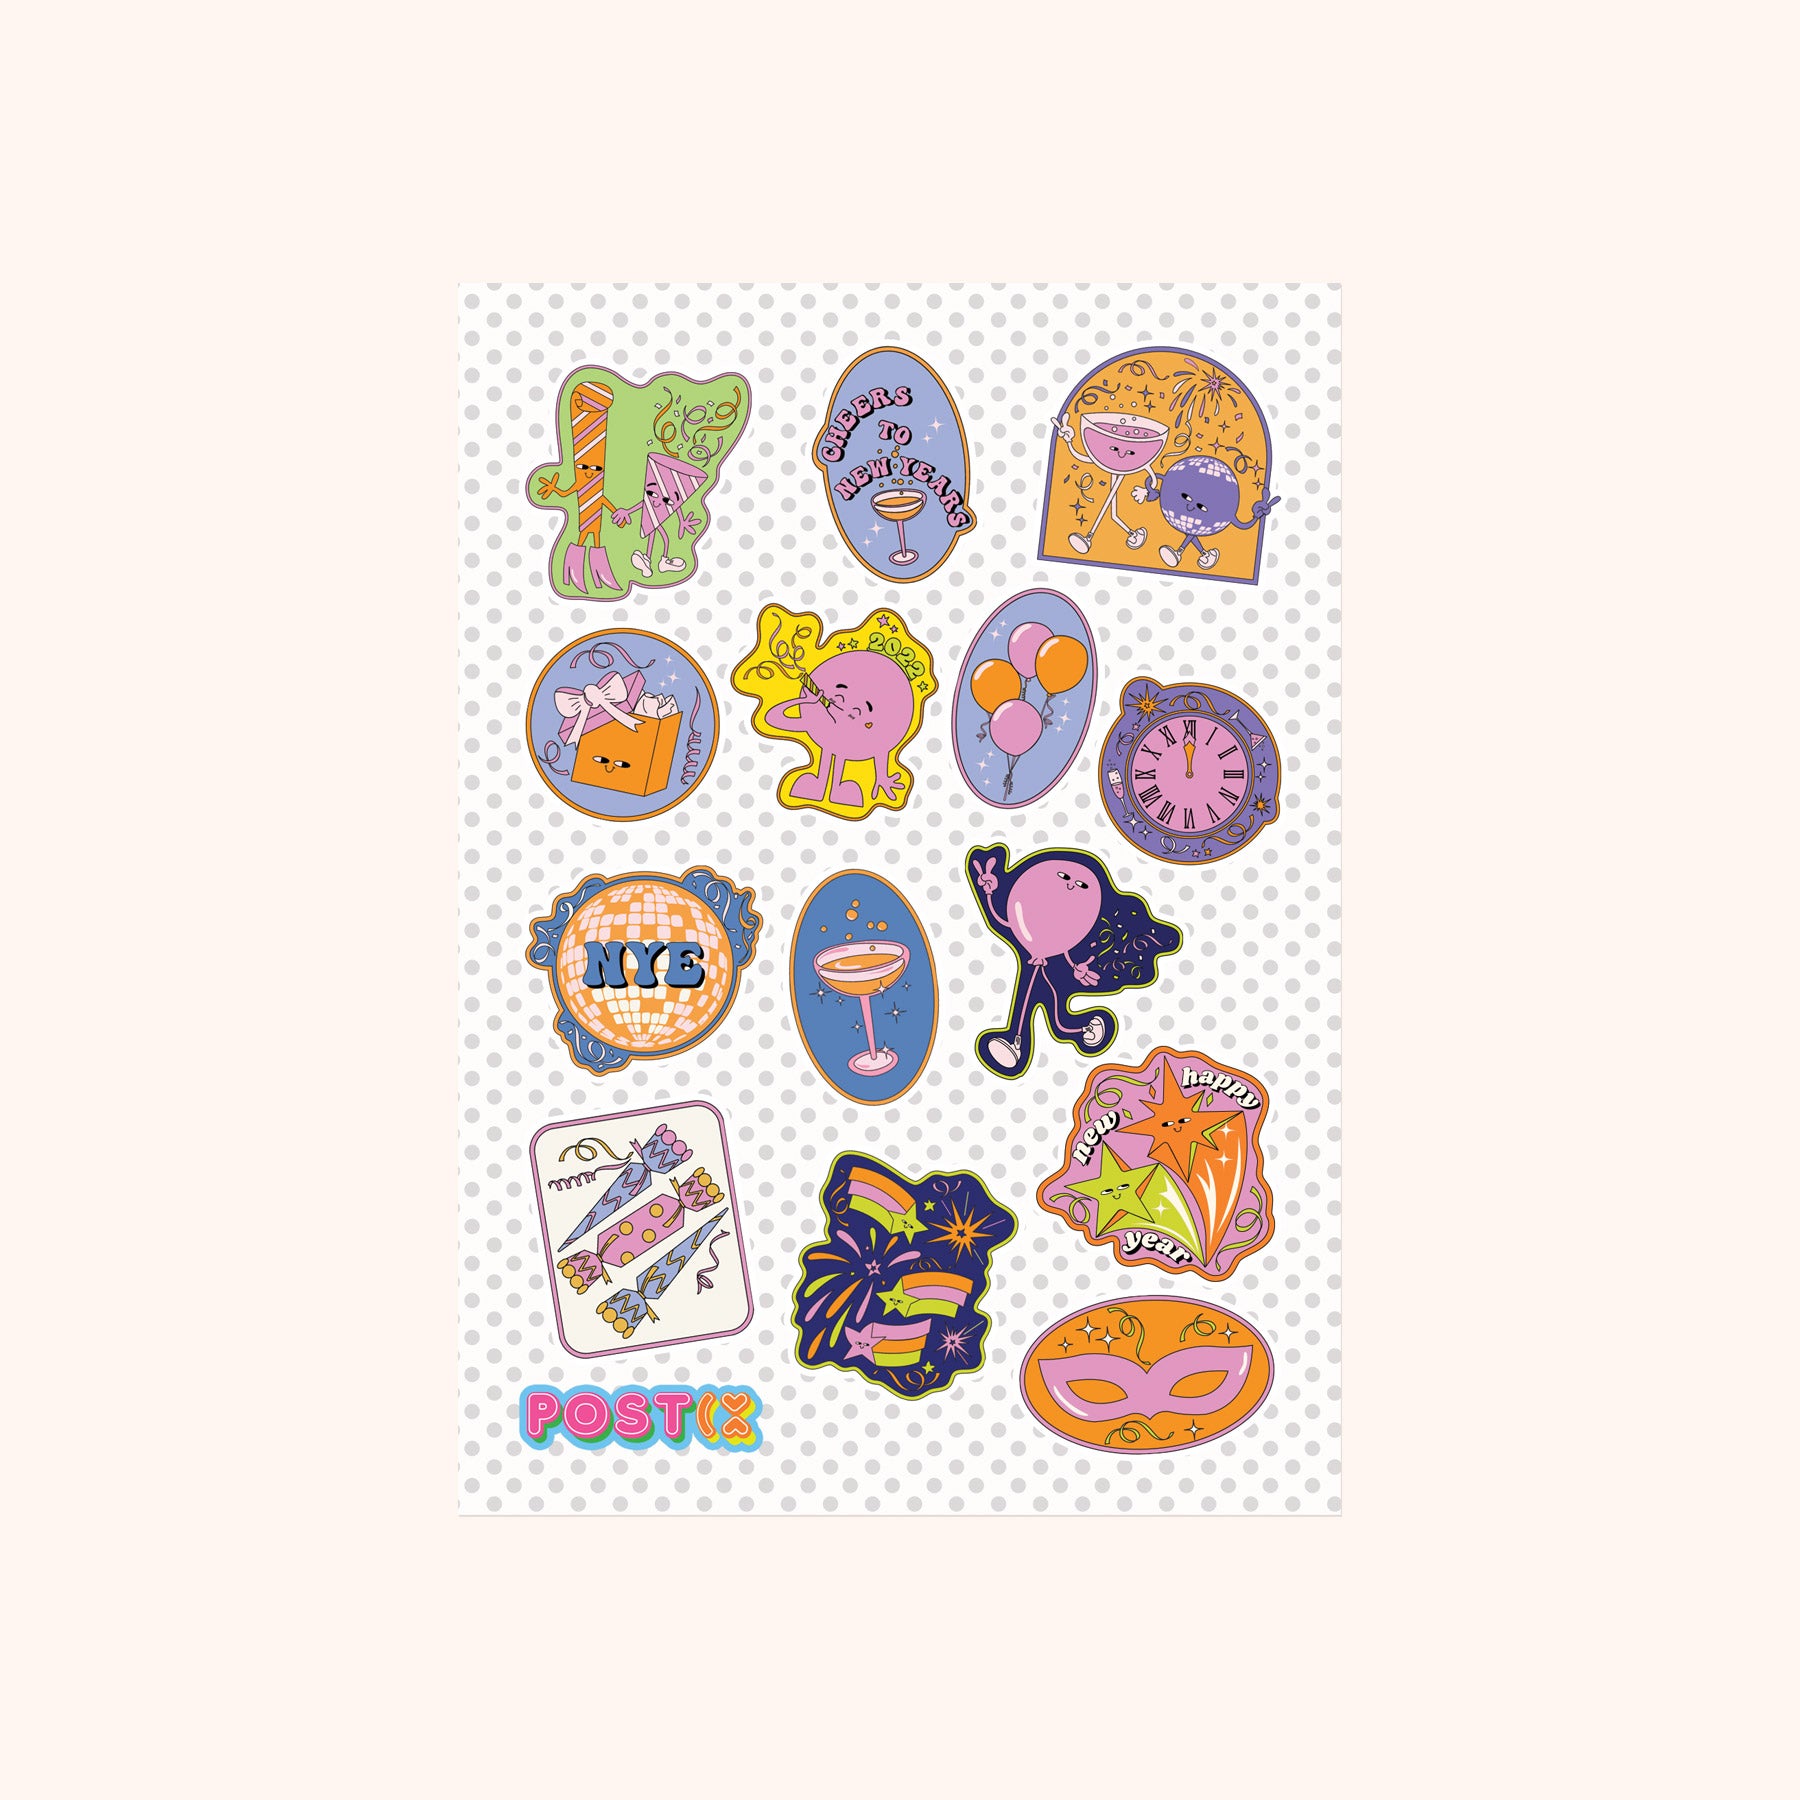 Cheers to New Years A6 Sticker Sheet